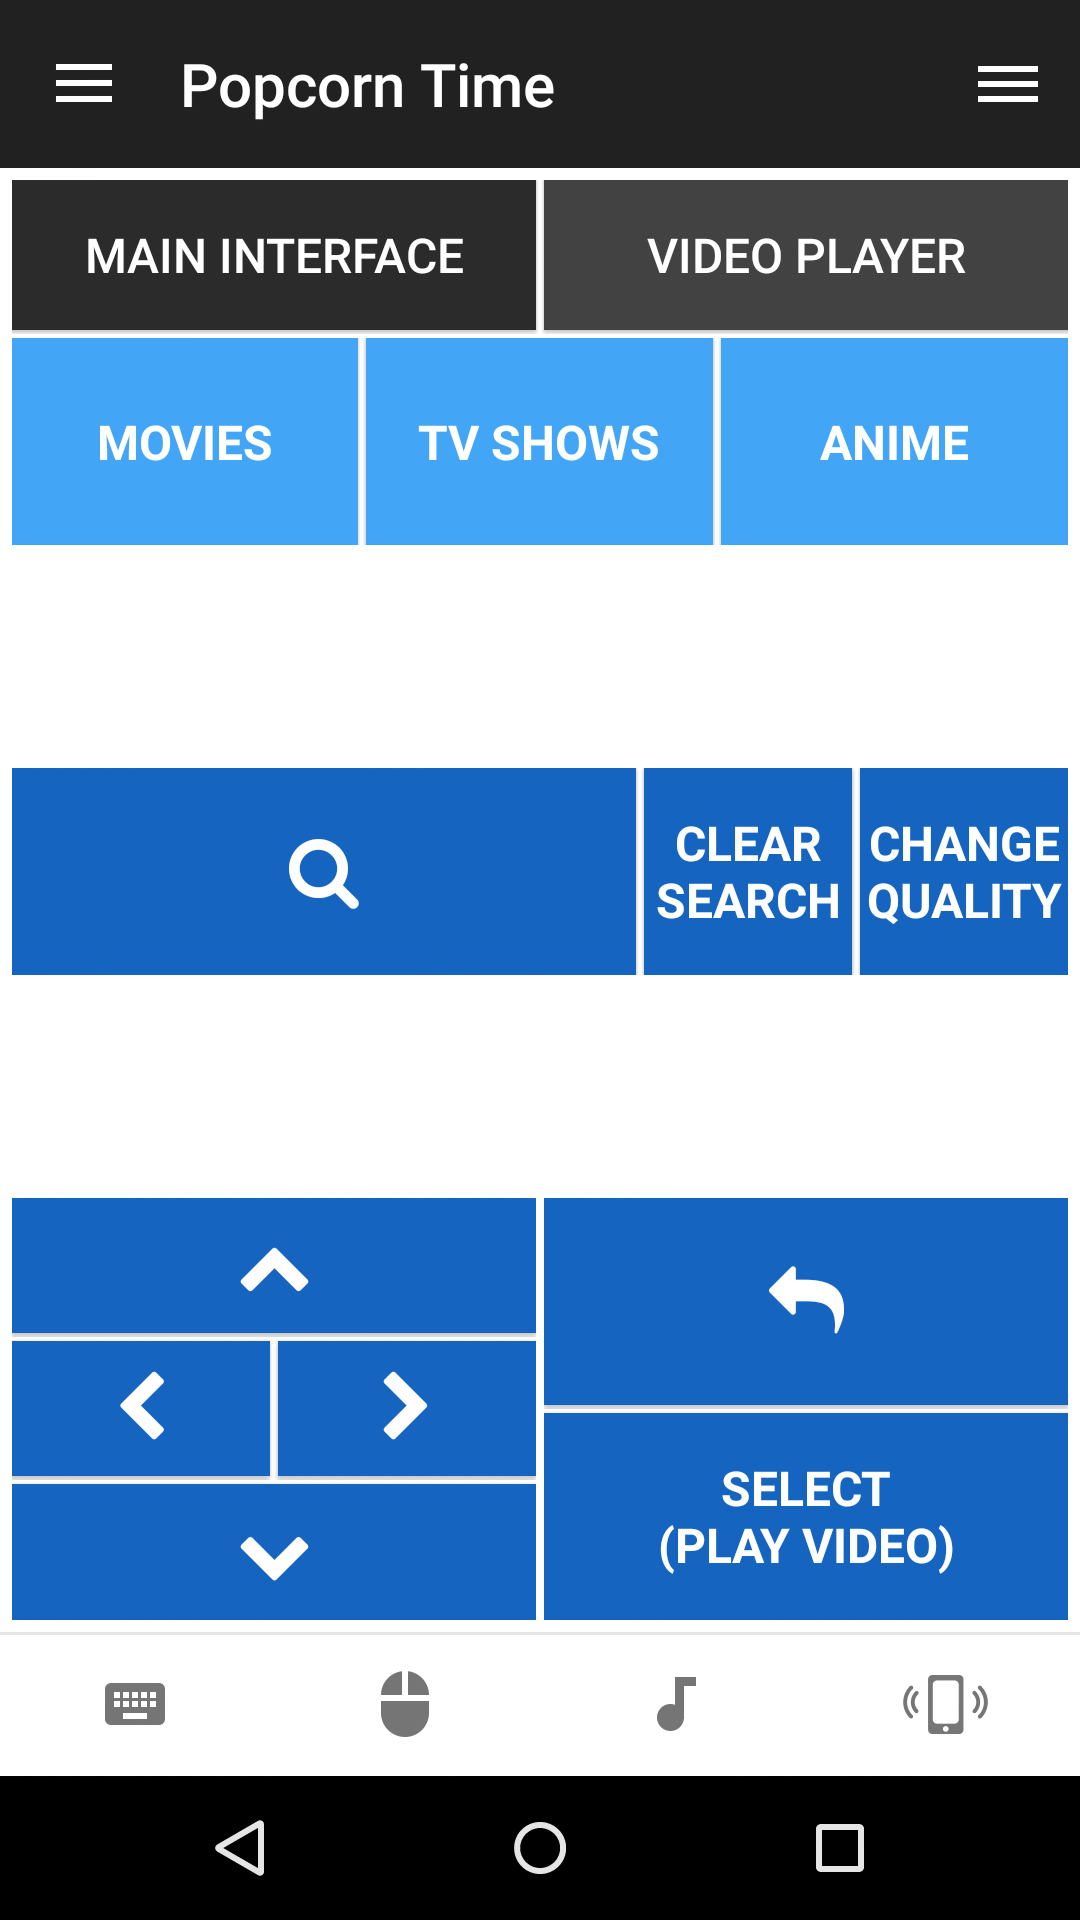 Main interface interface of PopcornTime remote